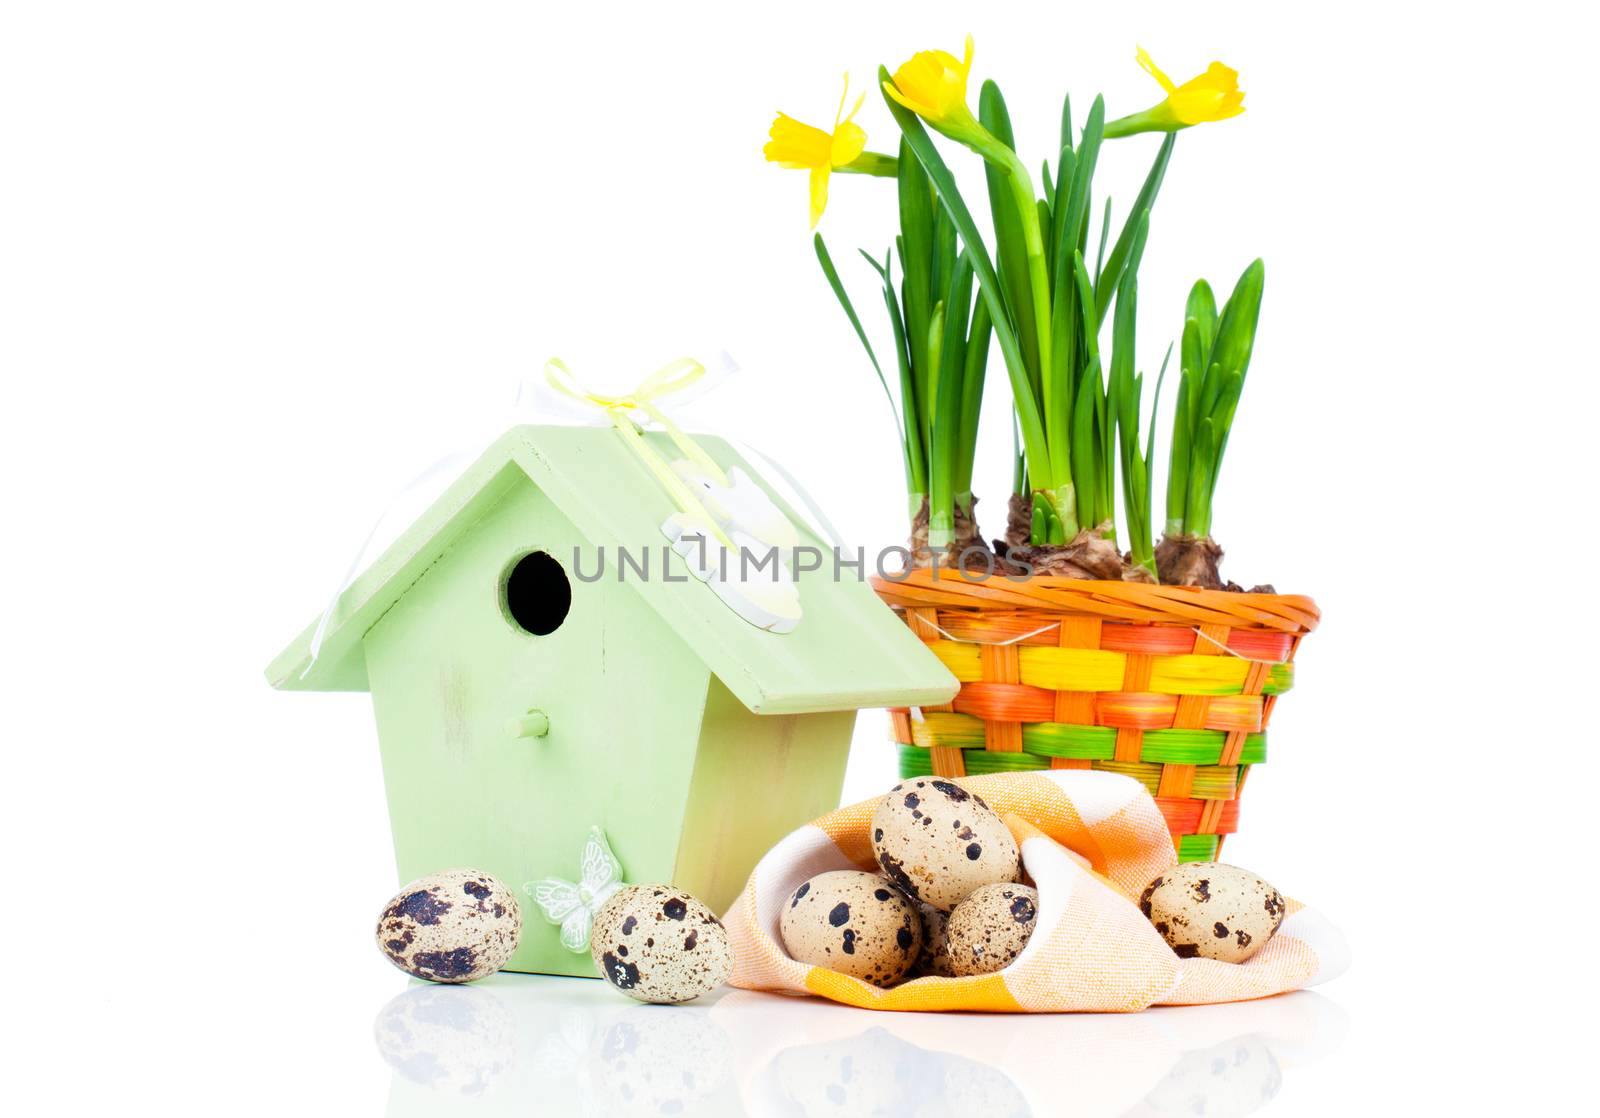 quail eggs with birdhouse, on a white background by motorolka